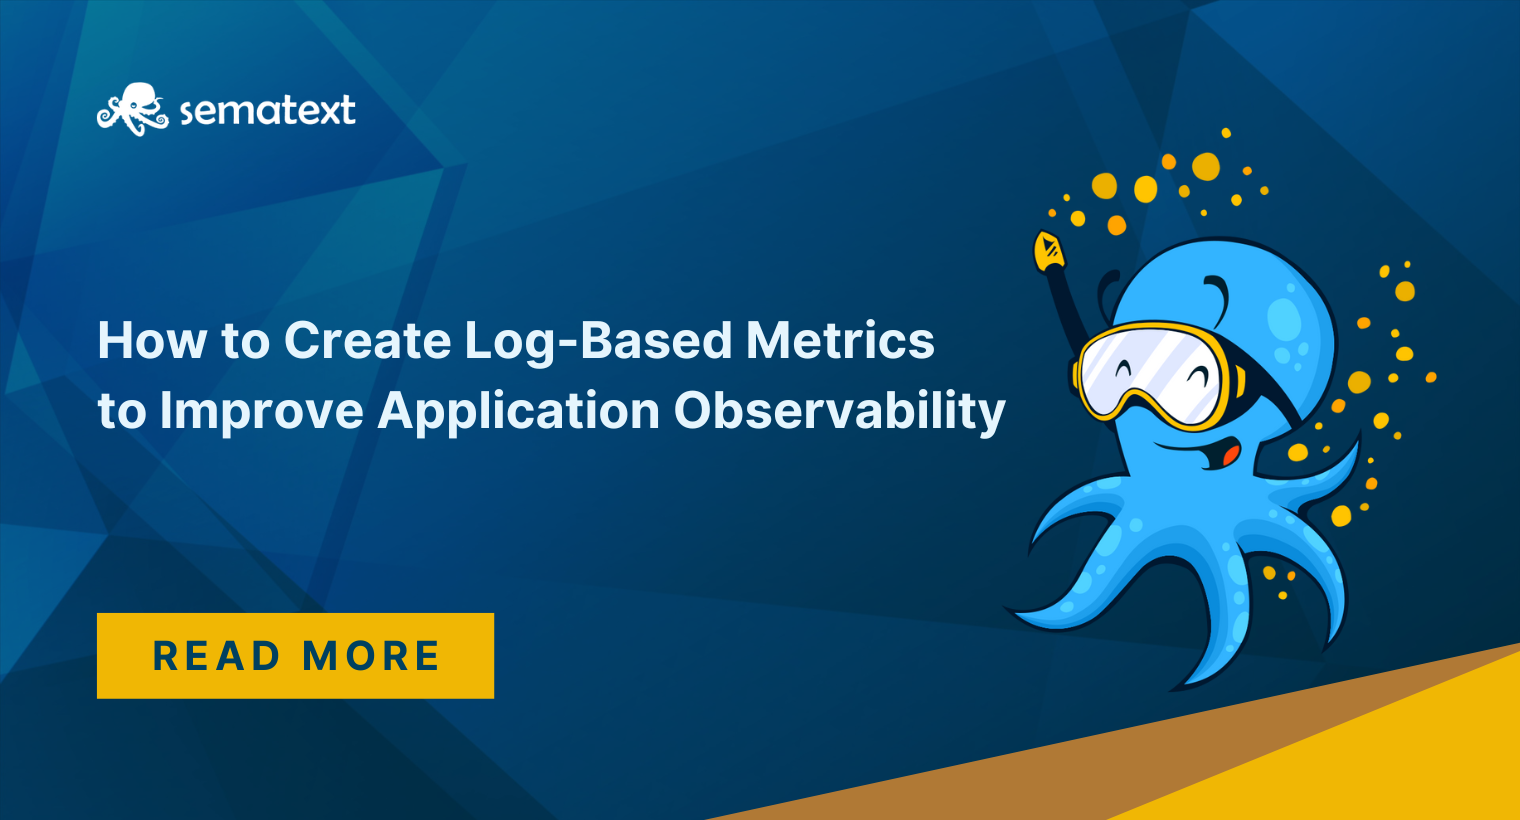 How to Create Log-Based Metrics to Improve Application Observability